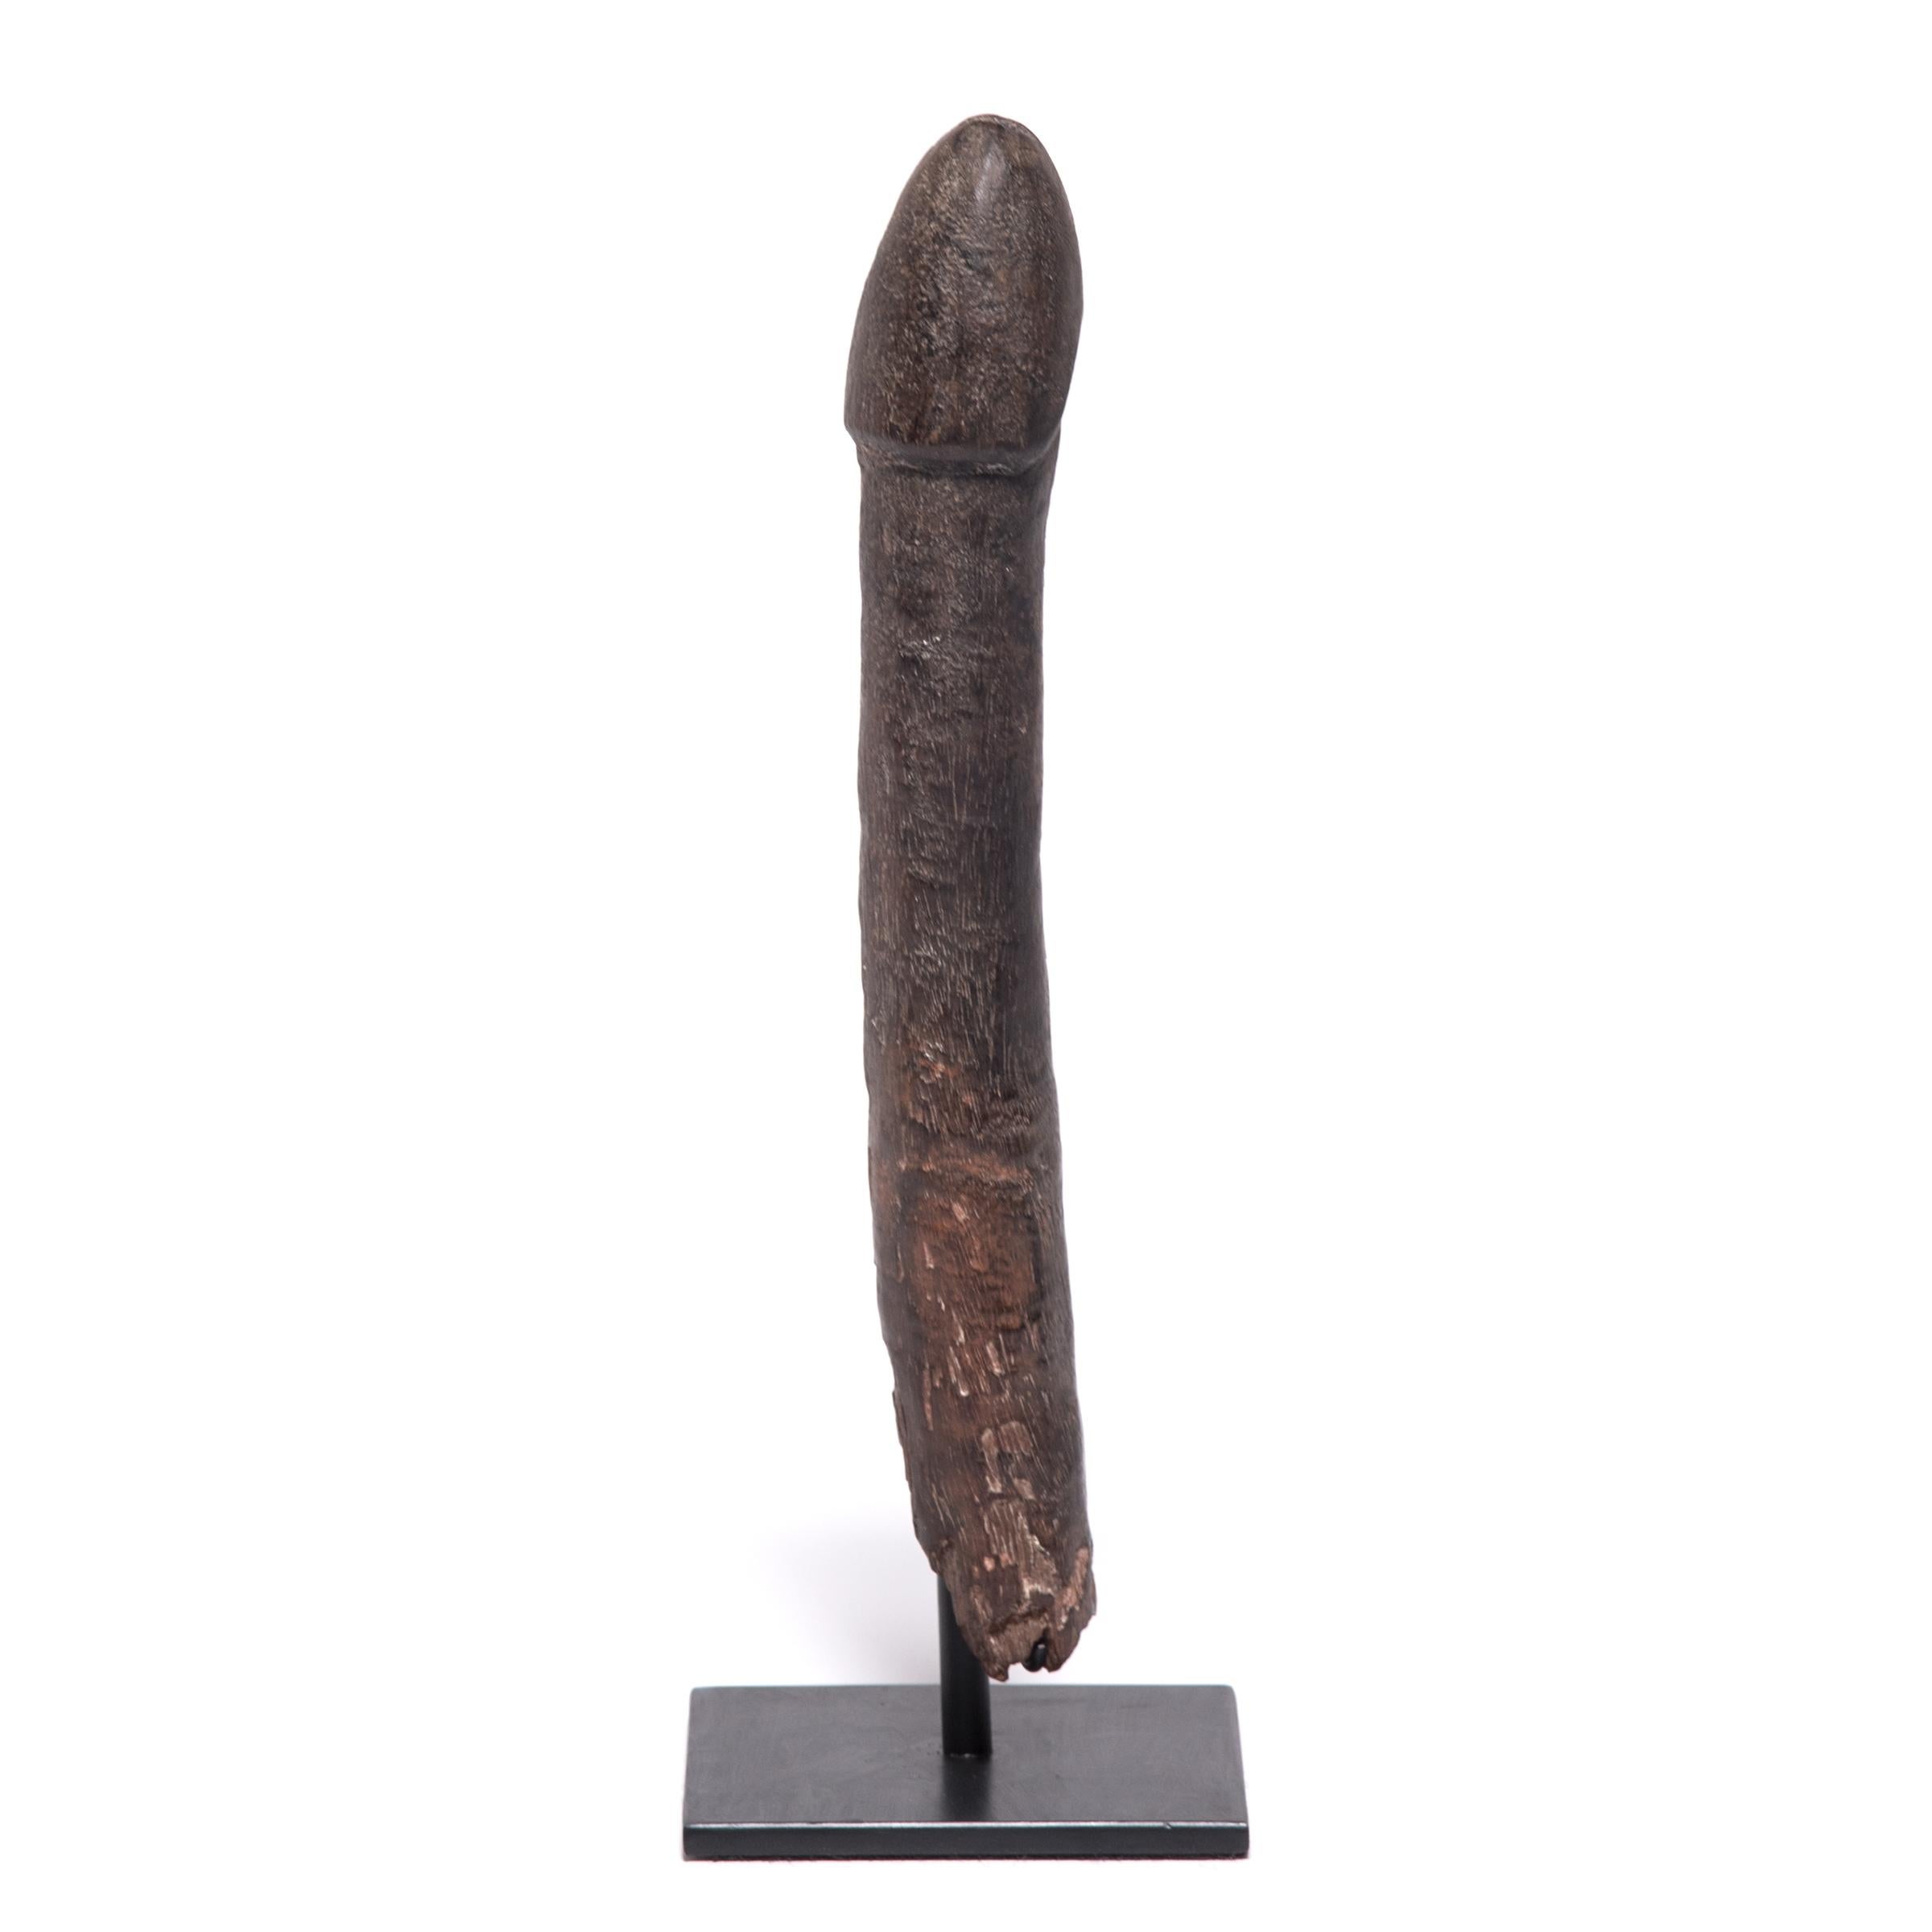 This carved-wood phallus, called a Legba, was among many placed outside dwellings and in the fields of the Fon people of West Africa to ensure fertility and bountiful harvests. These phallic carvings were named after Legba, the trickster son of God,